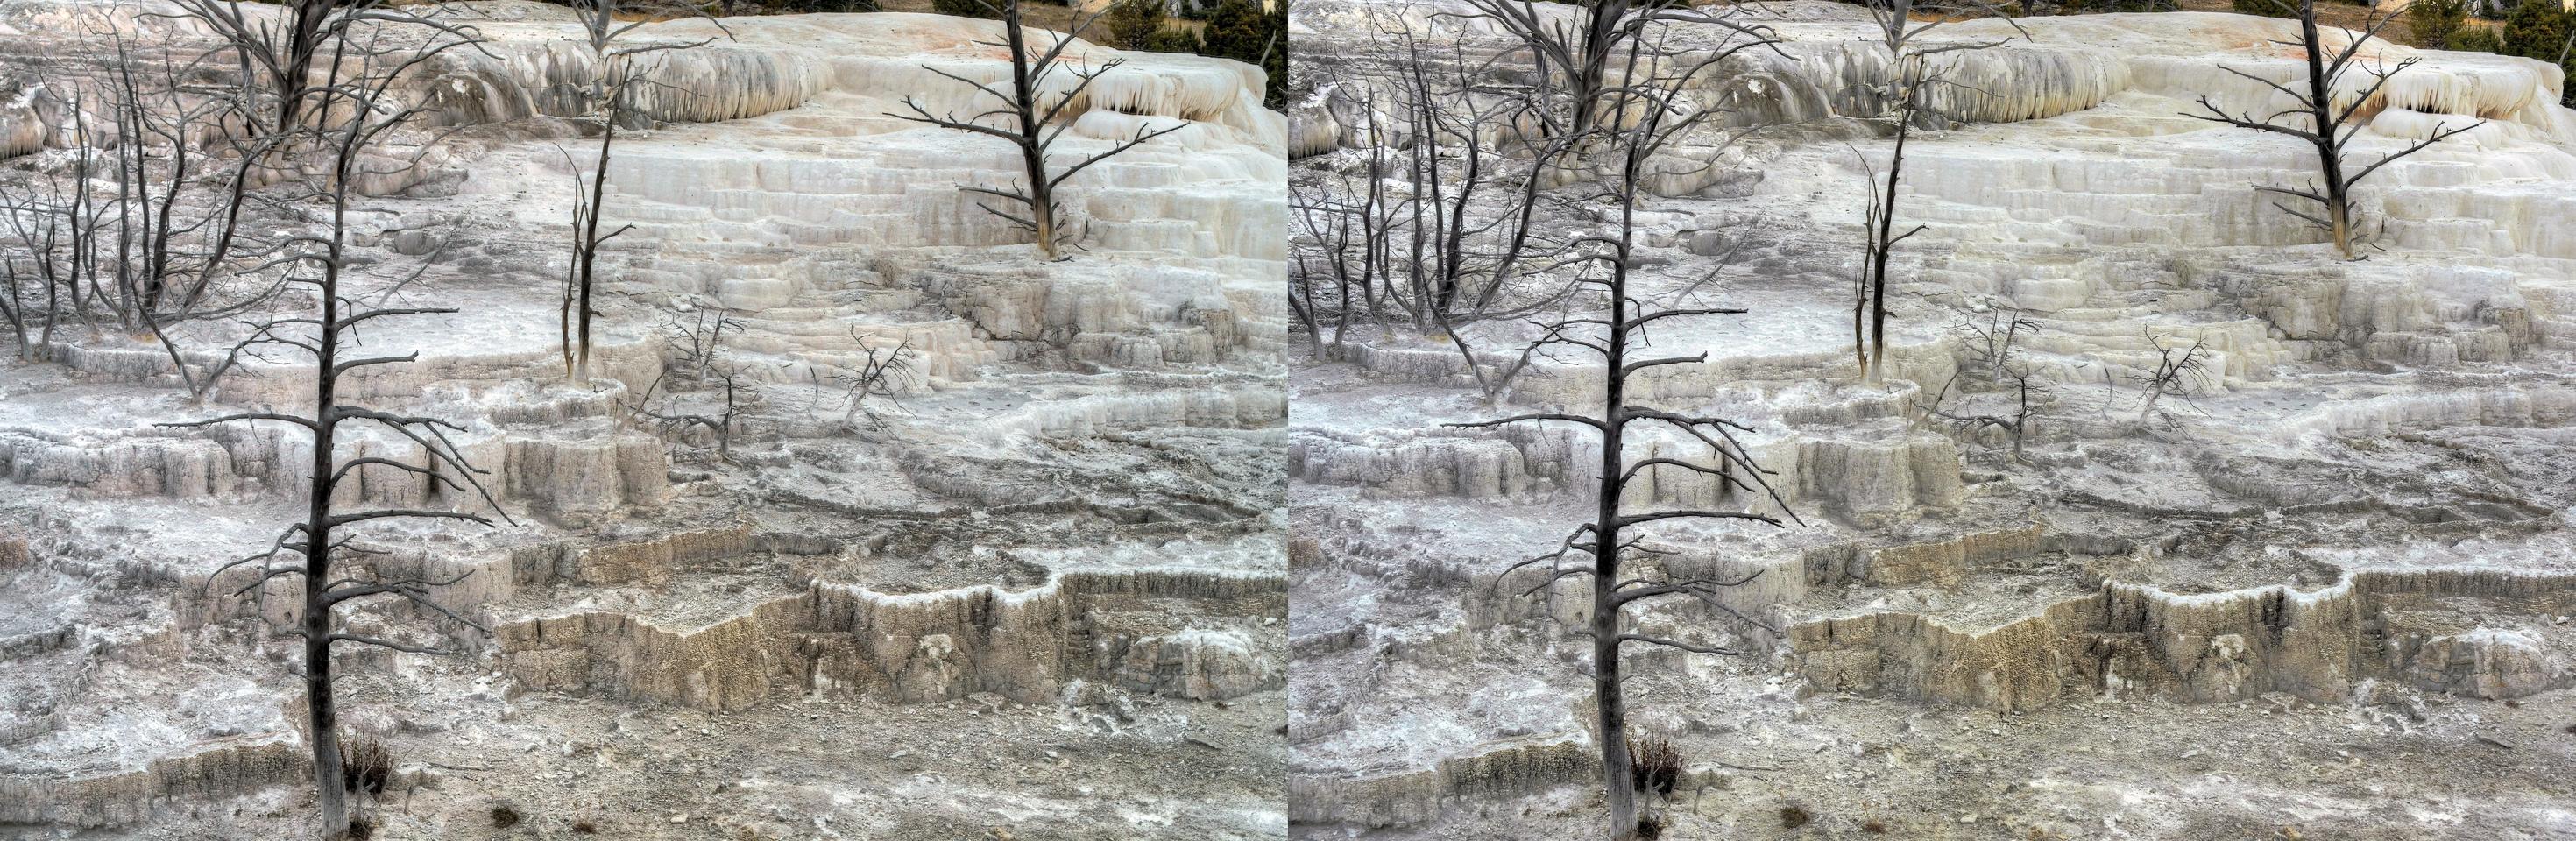 Dead springs, dead trees-   Mammoth Springs, Yellowstone